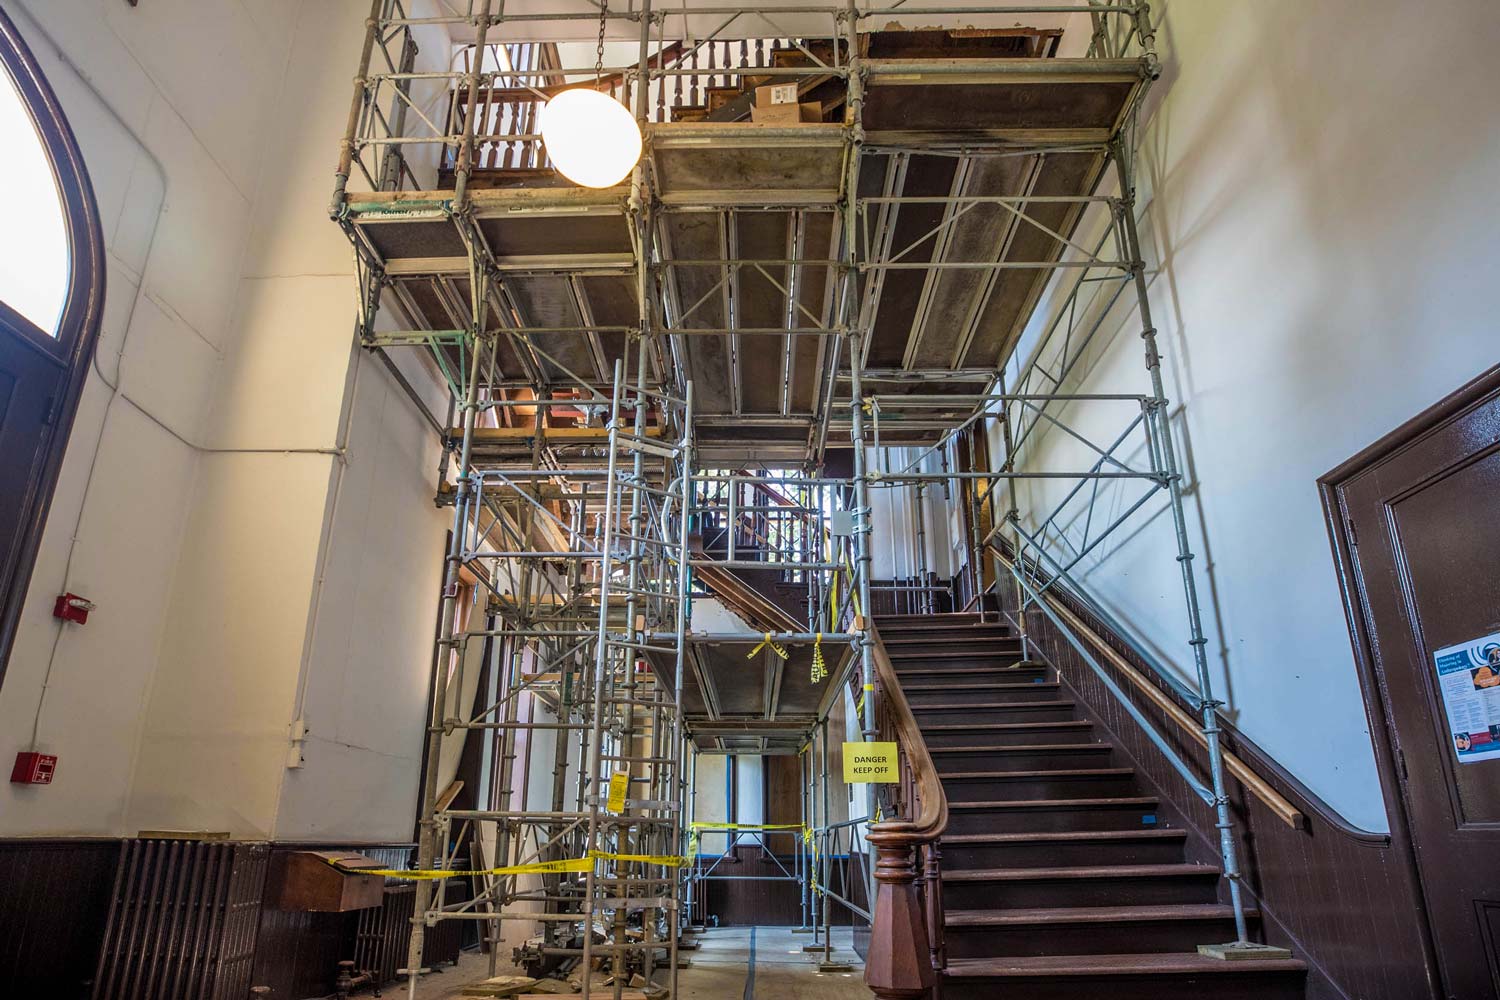 Scaffolding surrounds an old staircase